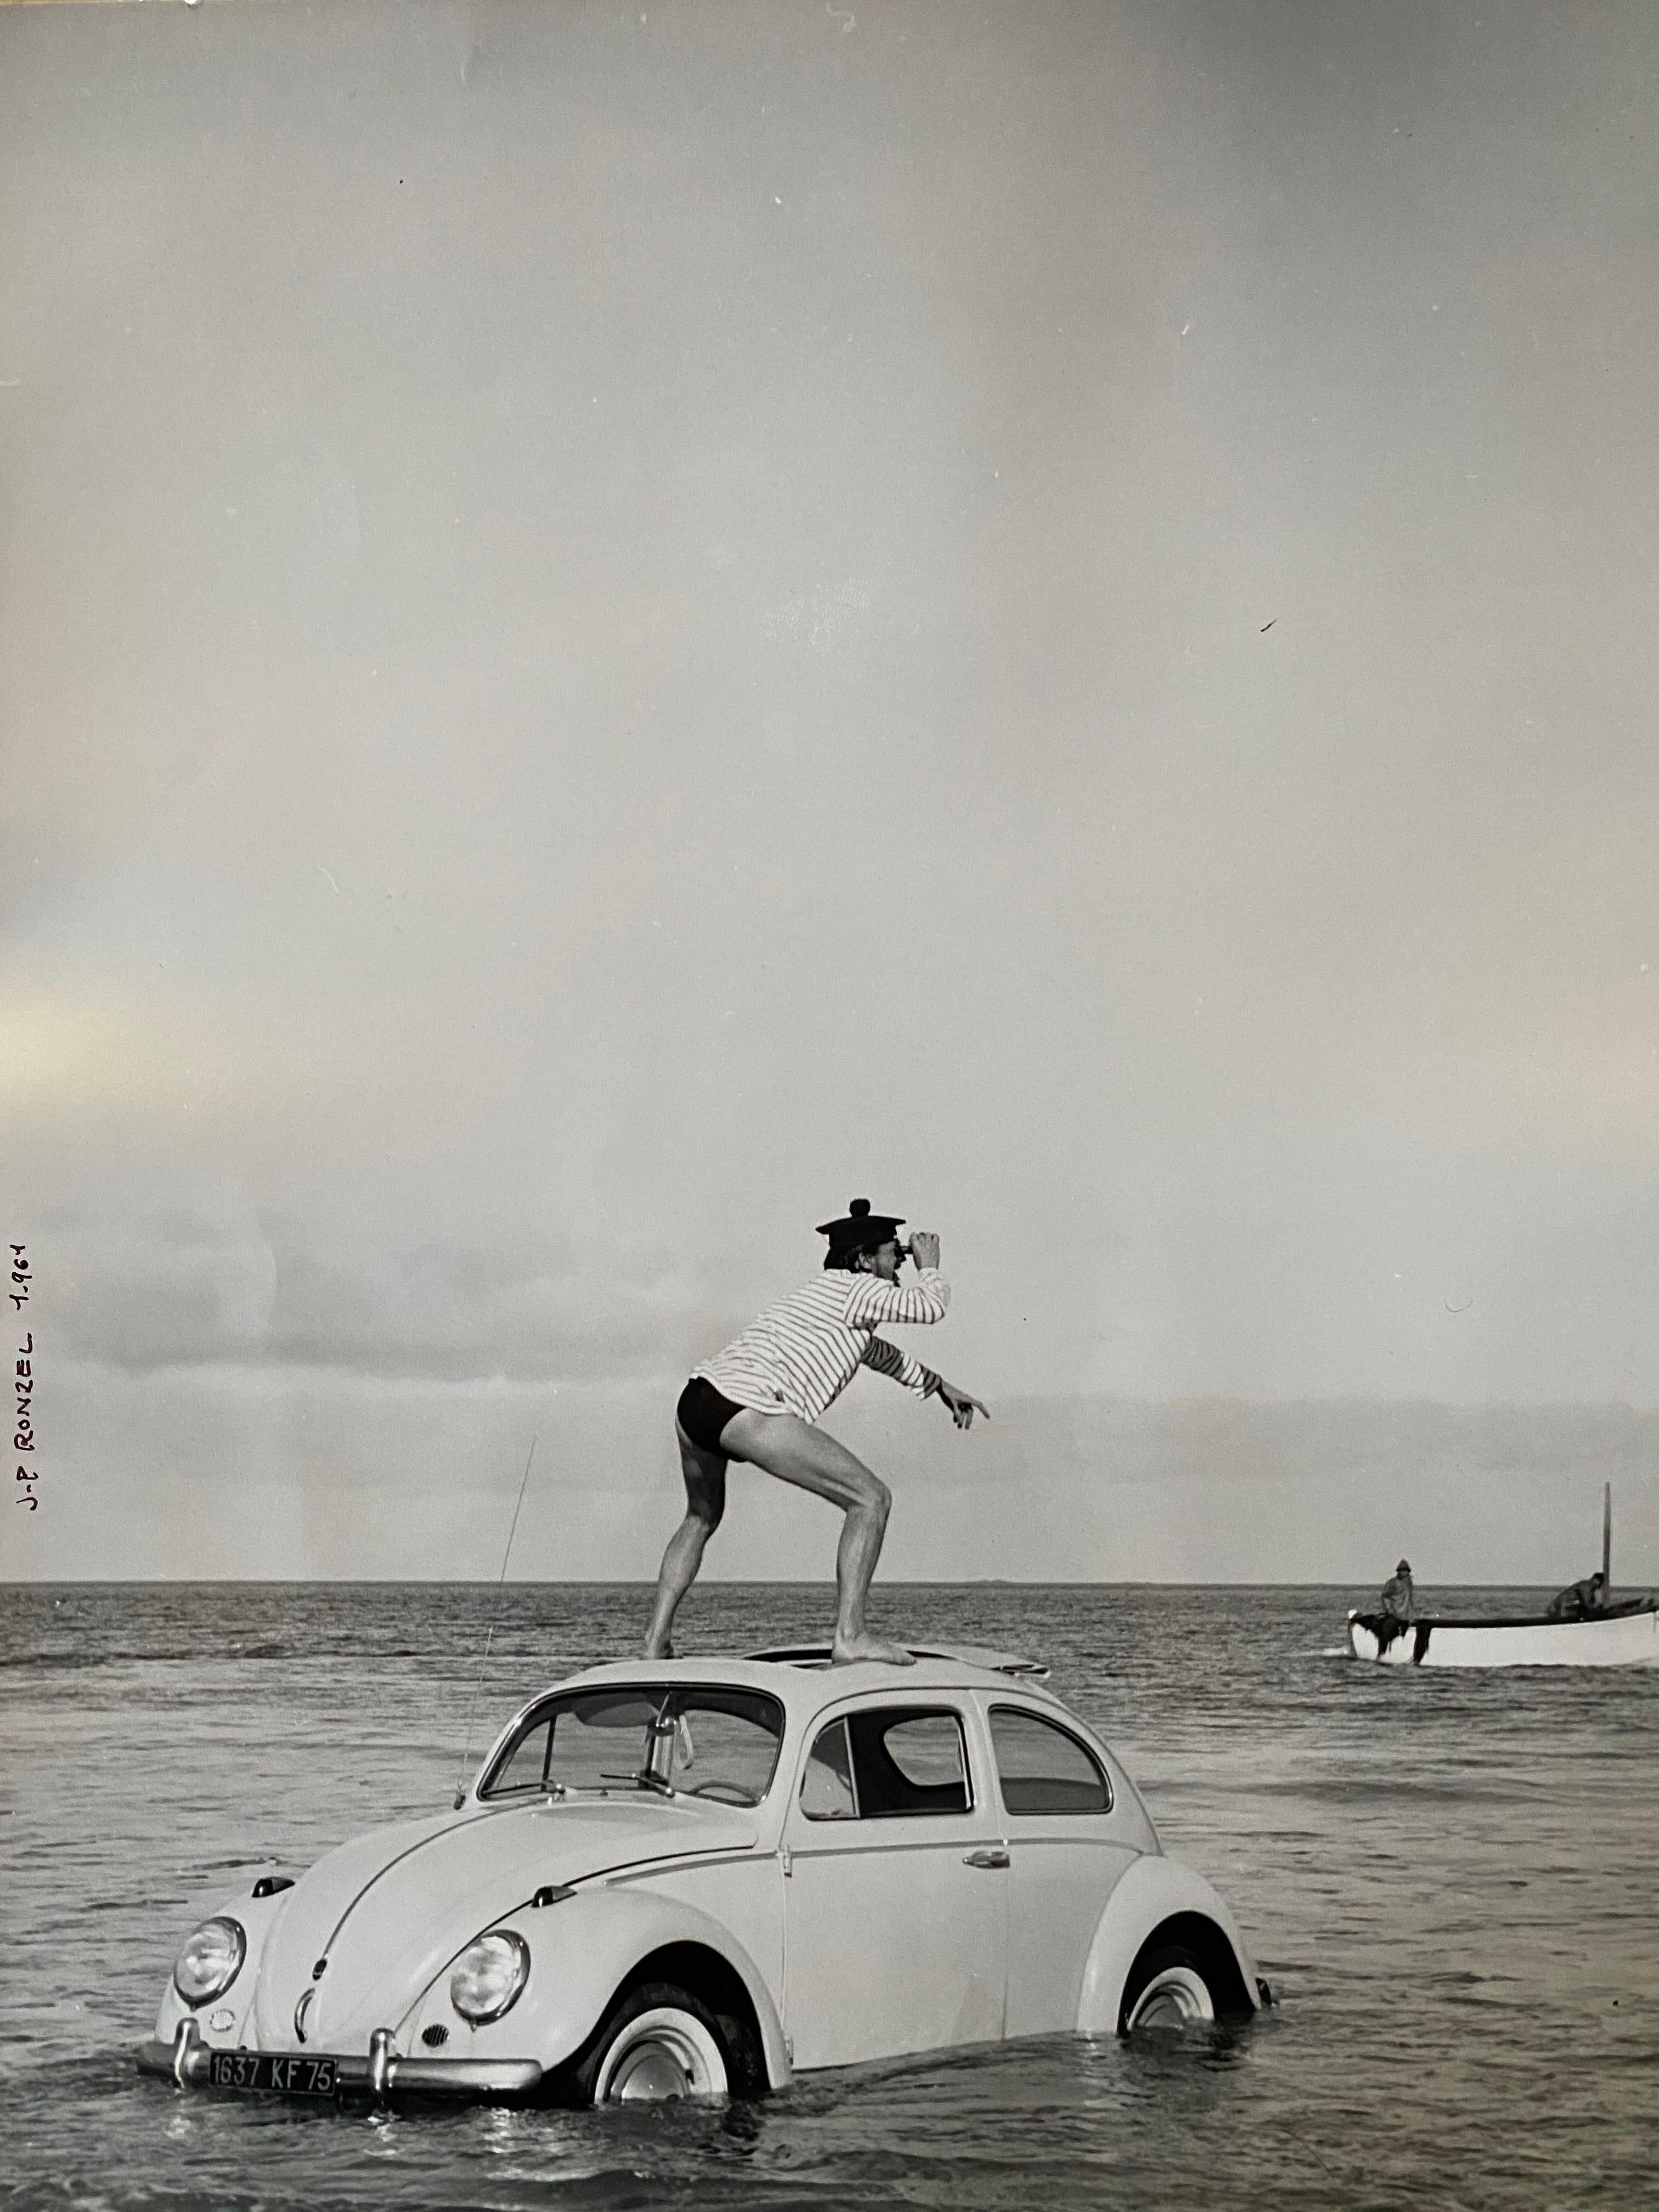 Jean pierre Ronzel Black and White Photograph - Jean-Pierre Ronzel  "The ladybird and the sailor"